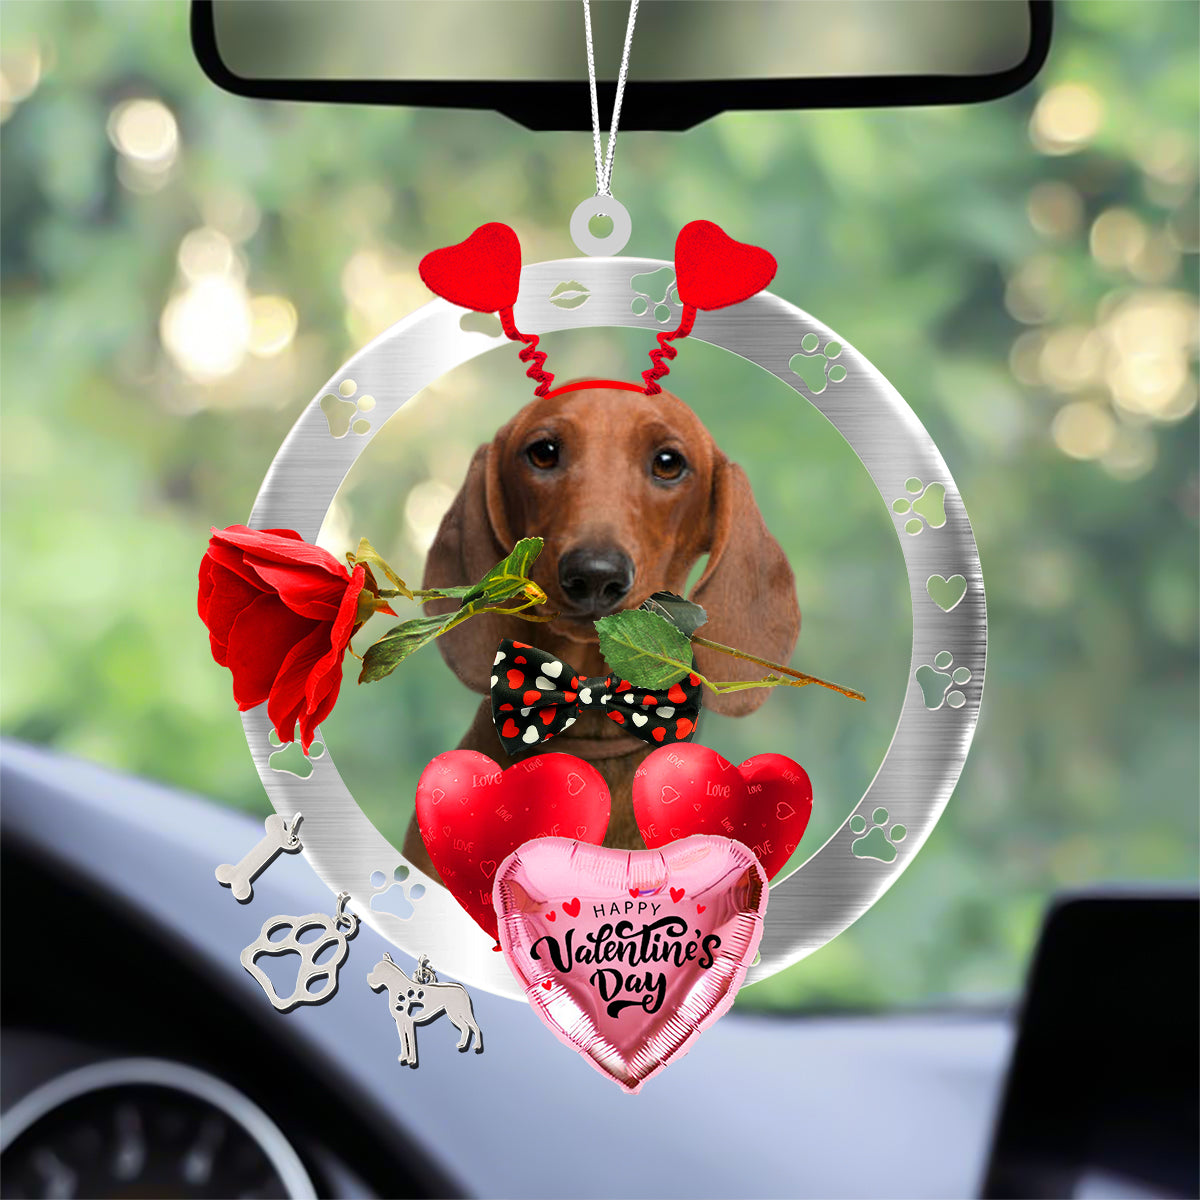 Dachshund 2 With Rose & Heart Balloon Ornament